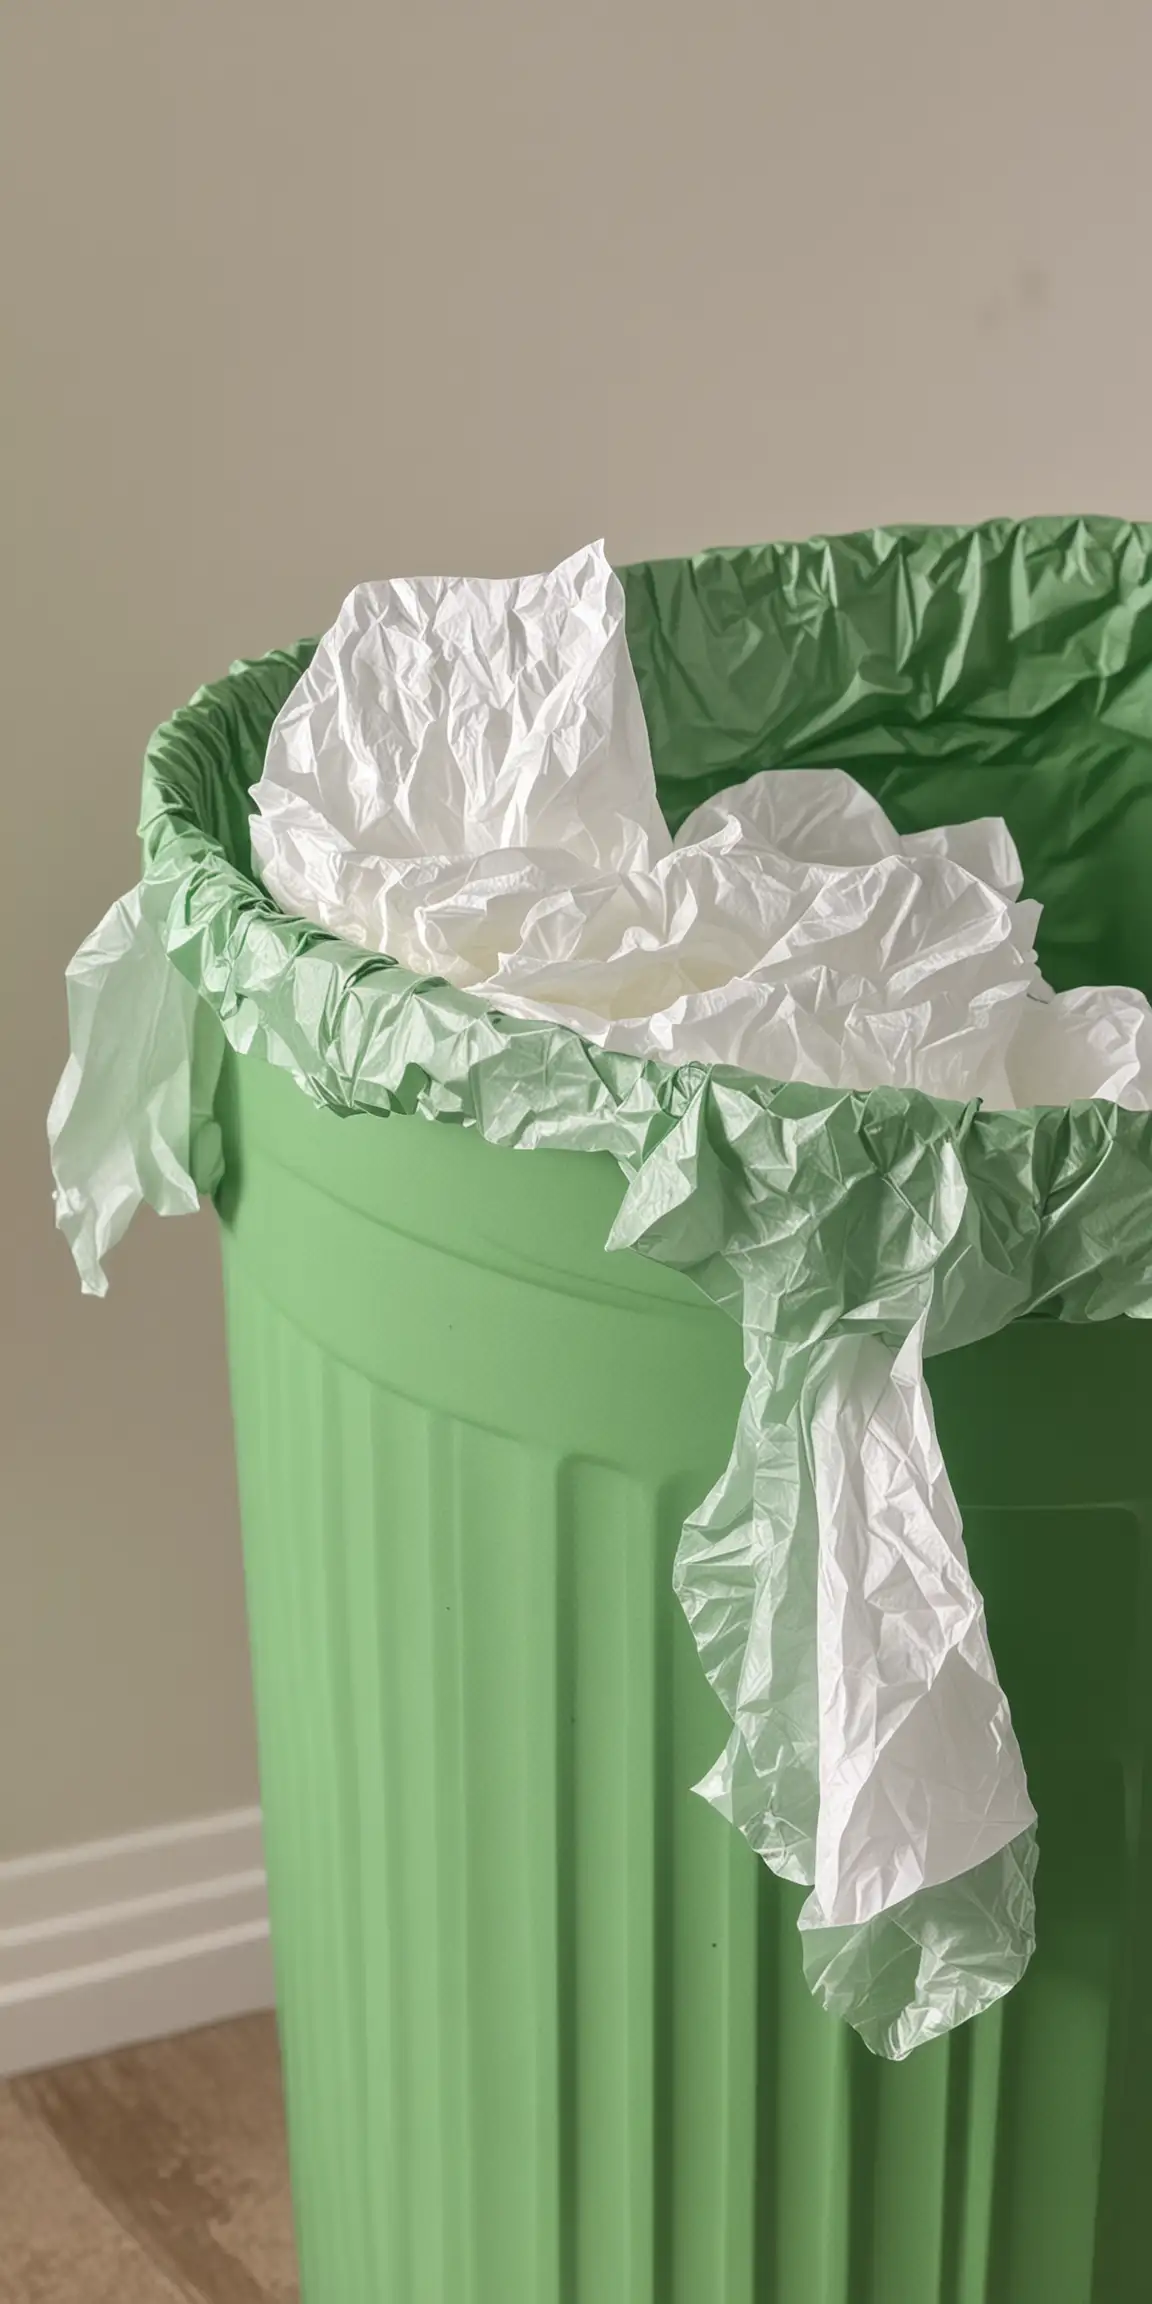 Close Up of Green Trash Can Filled with Tissue Paper